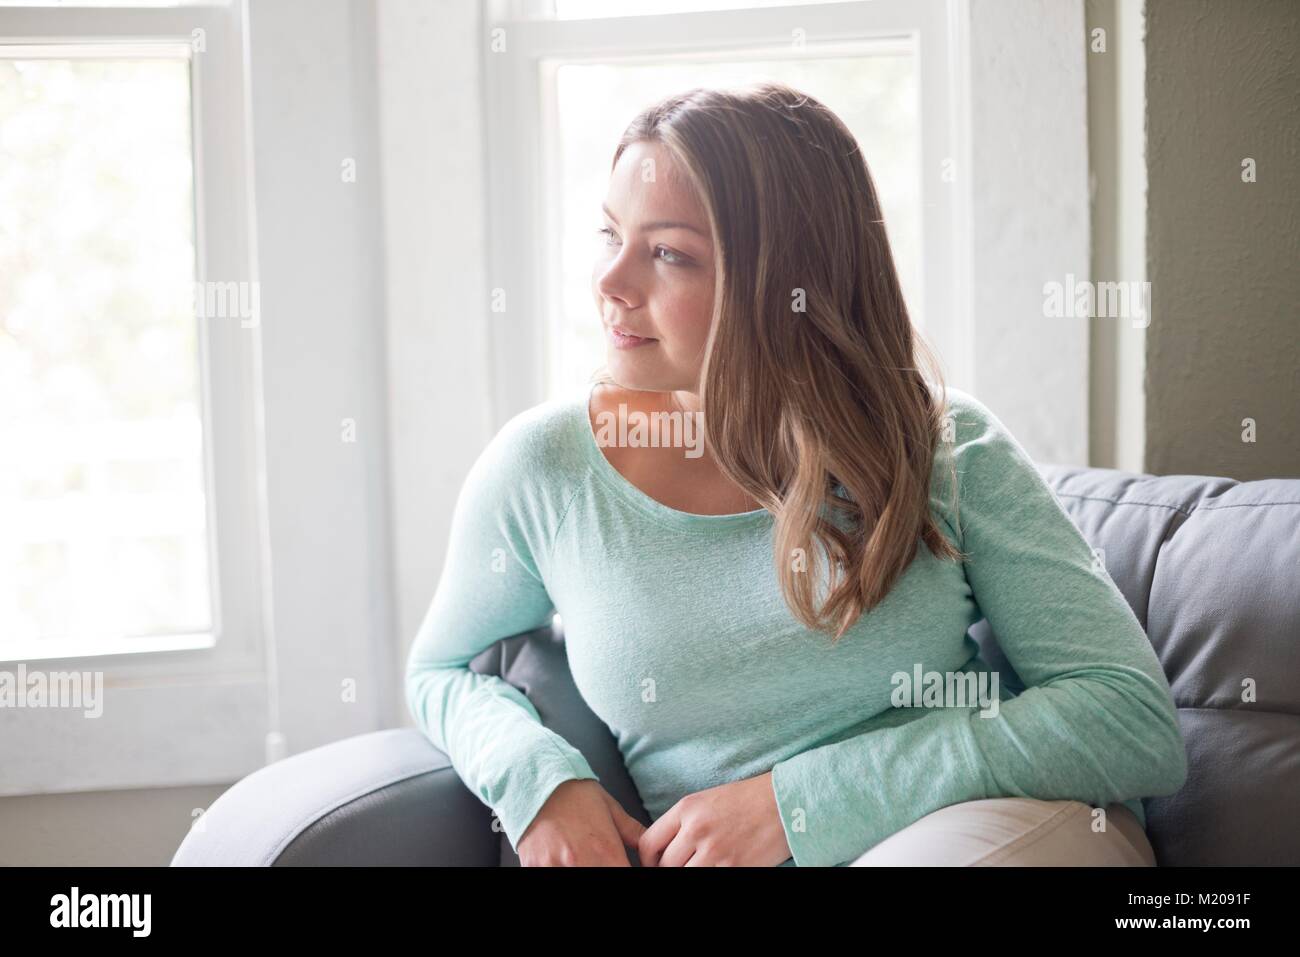 Young woman sitting on sofa and looking away. Stock Photo